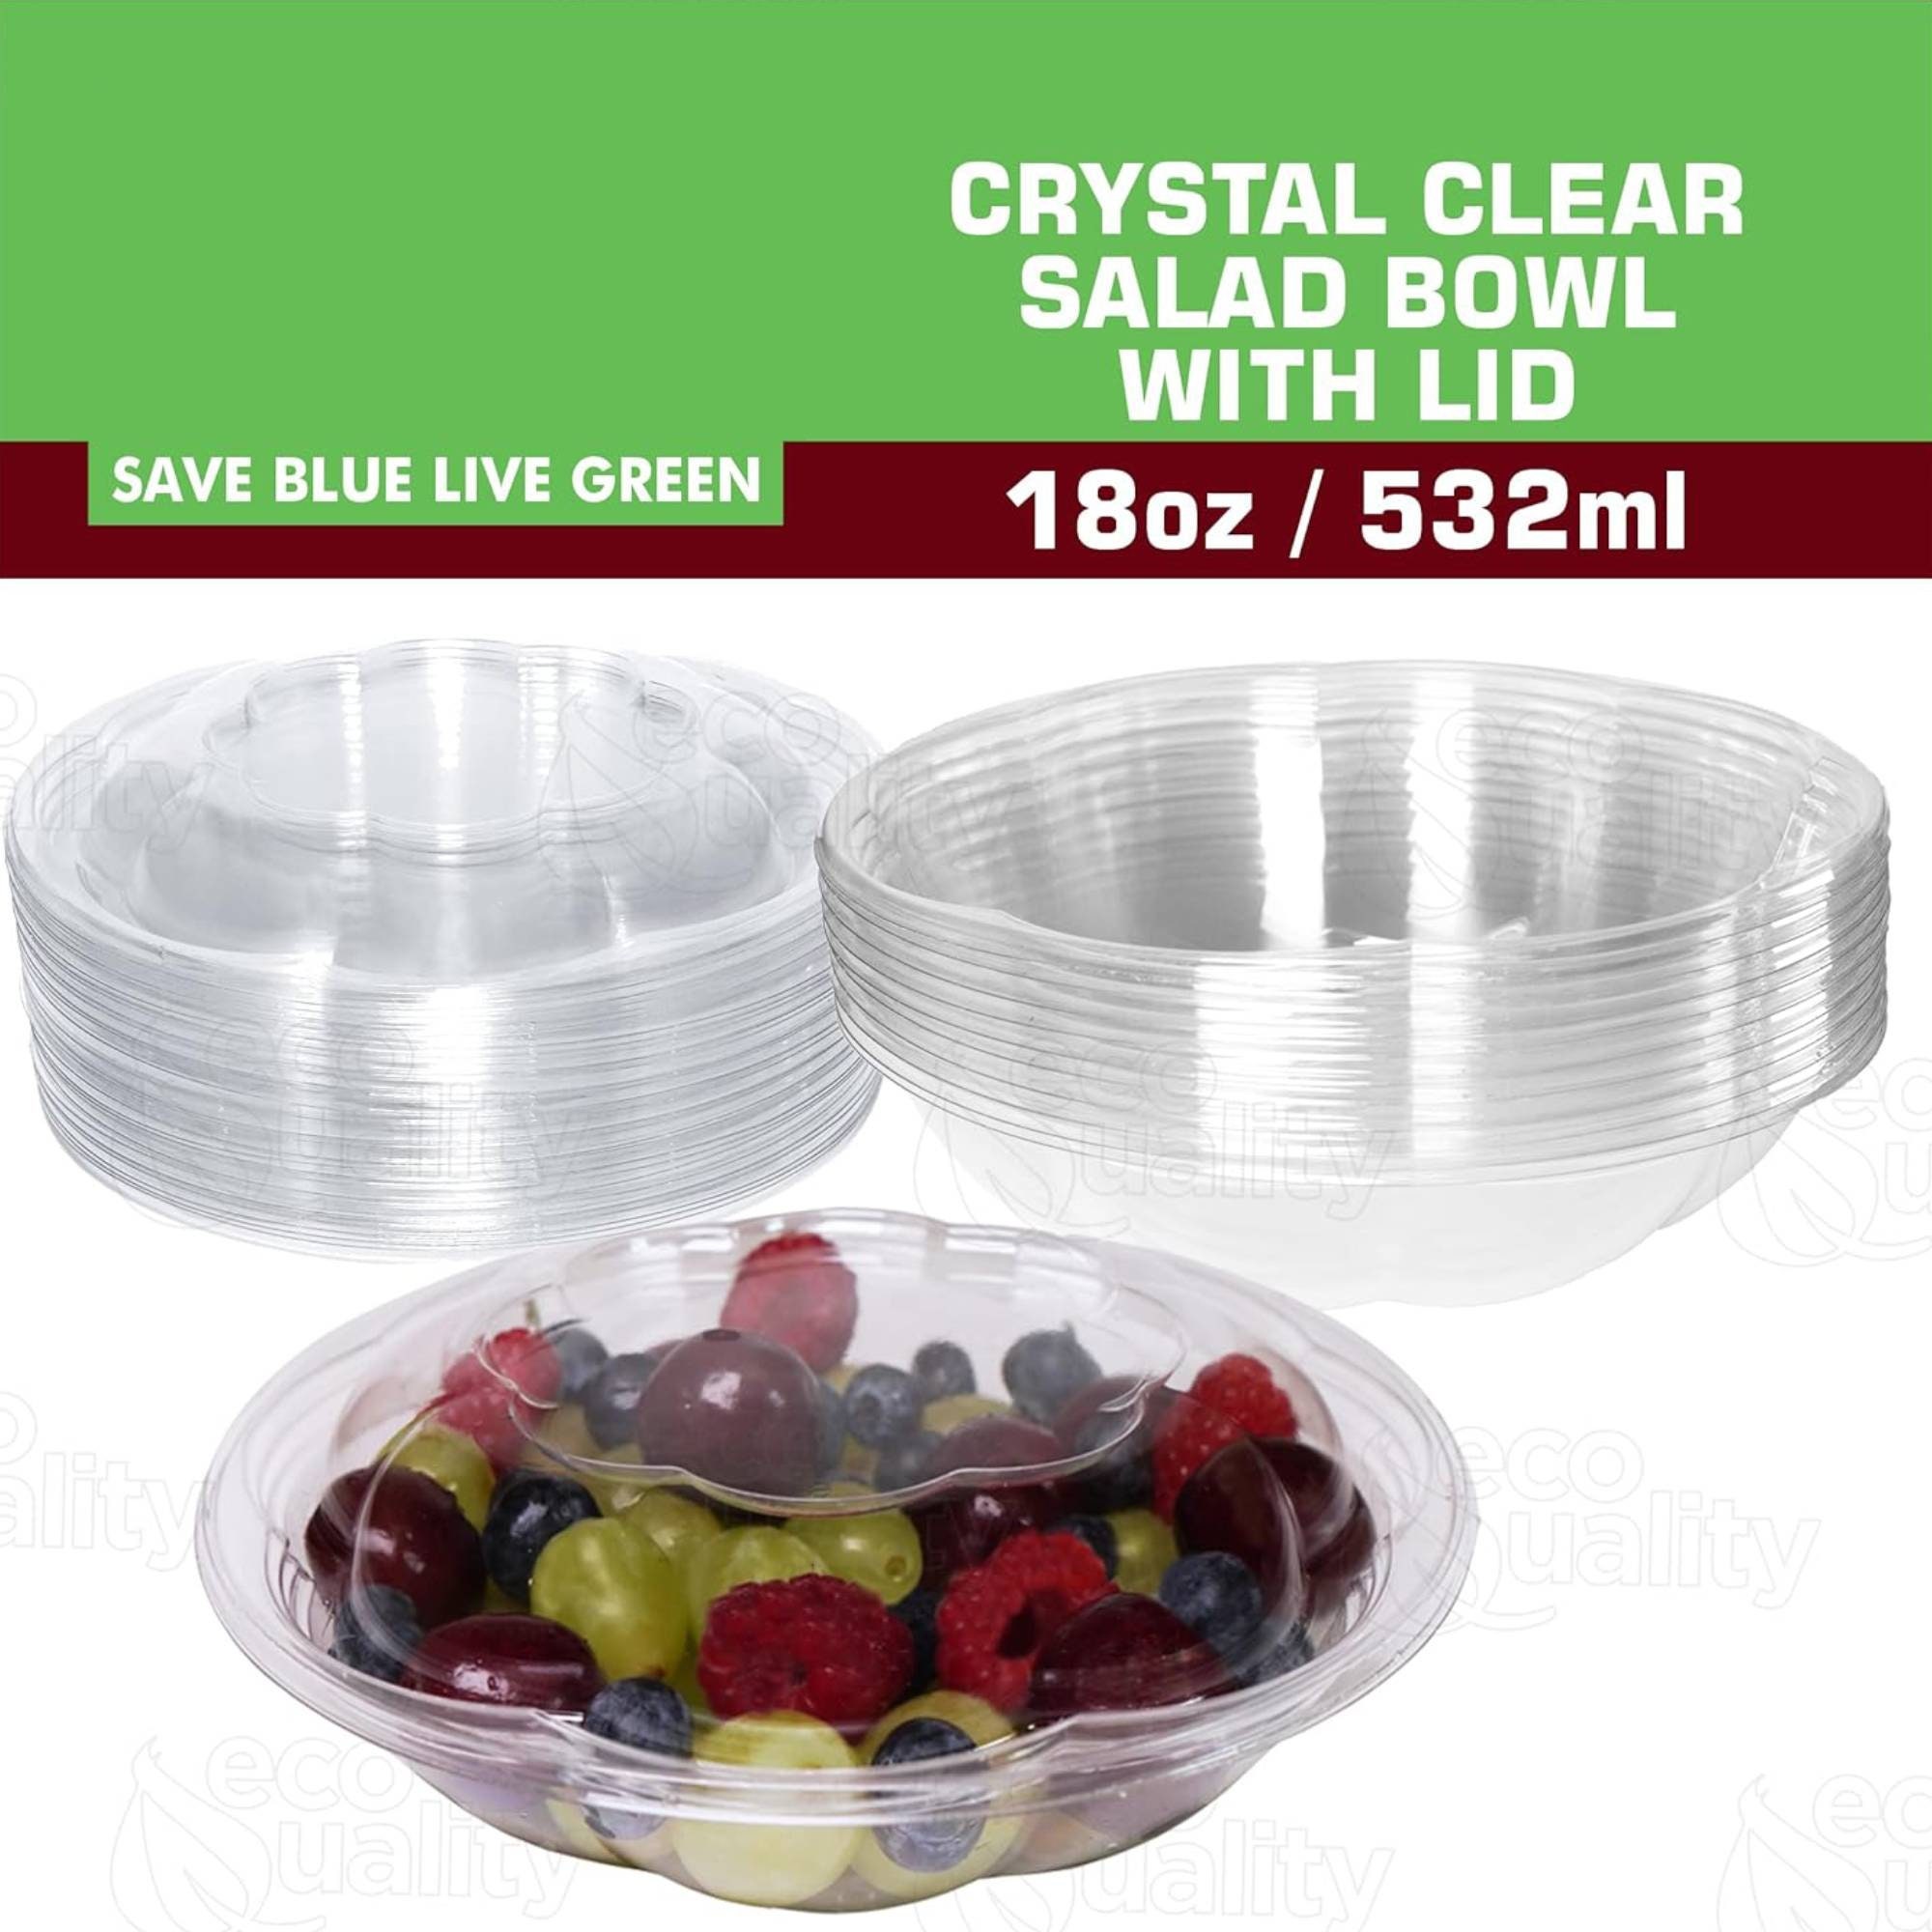 Fit Meal Prep 100 Pack 64 oz Clear Plastic Salad Bowls with Airtight Lids, Disposable to Go Salad Containers for Lunch, Meal, Party, BPA Free Clear